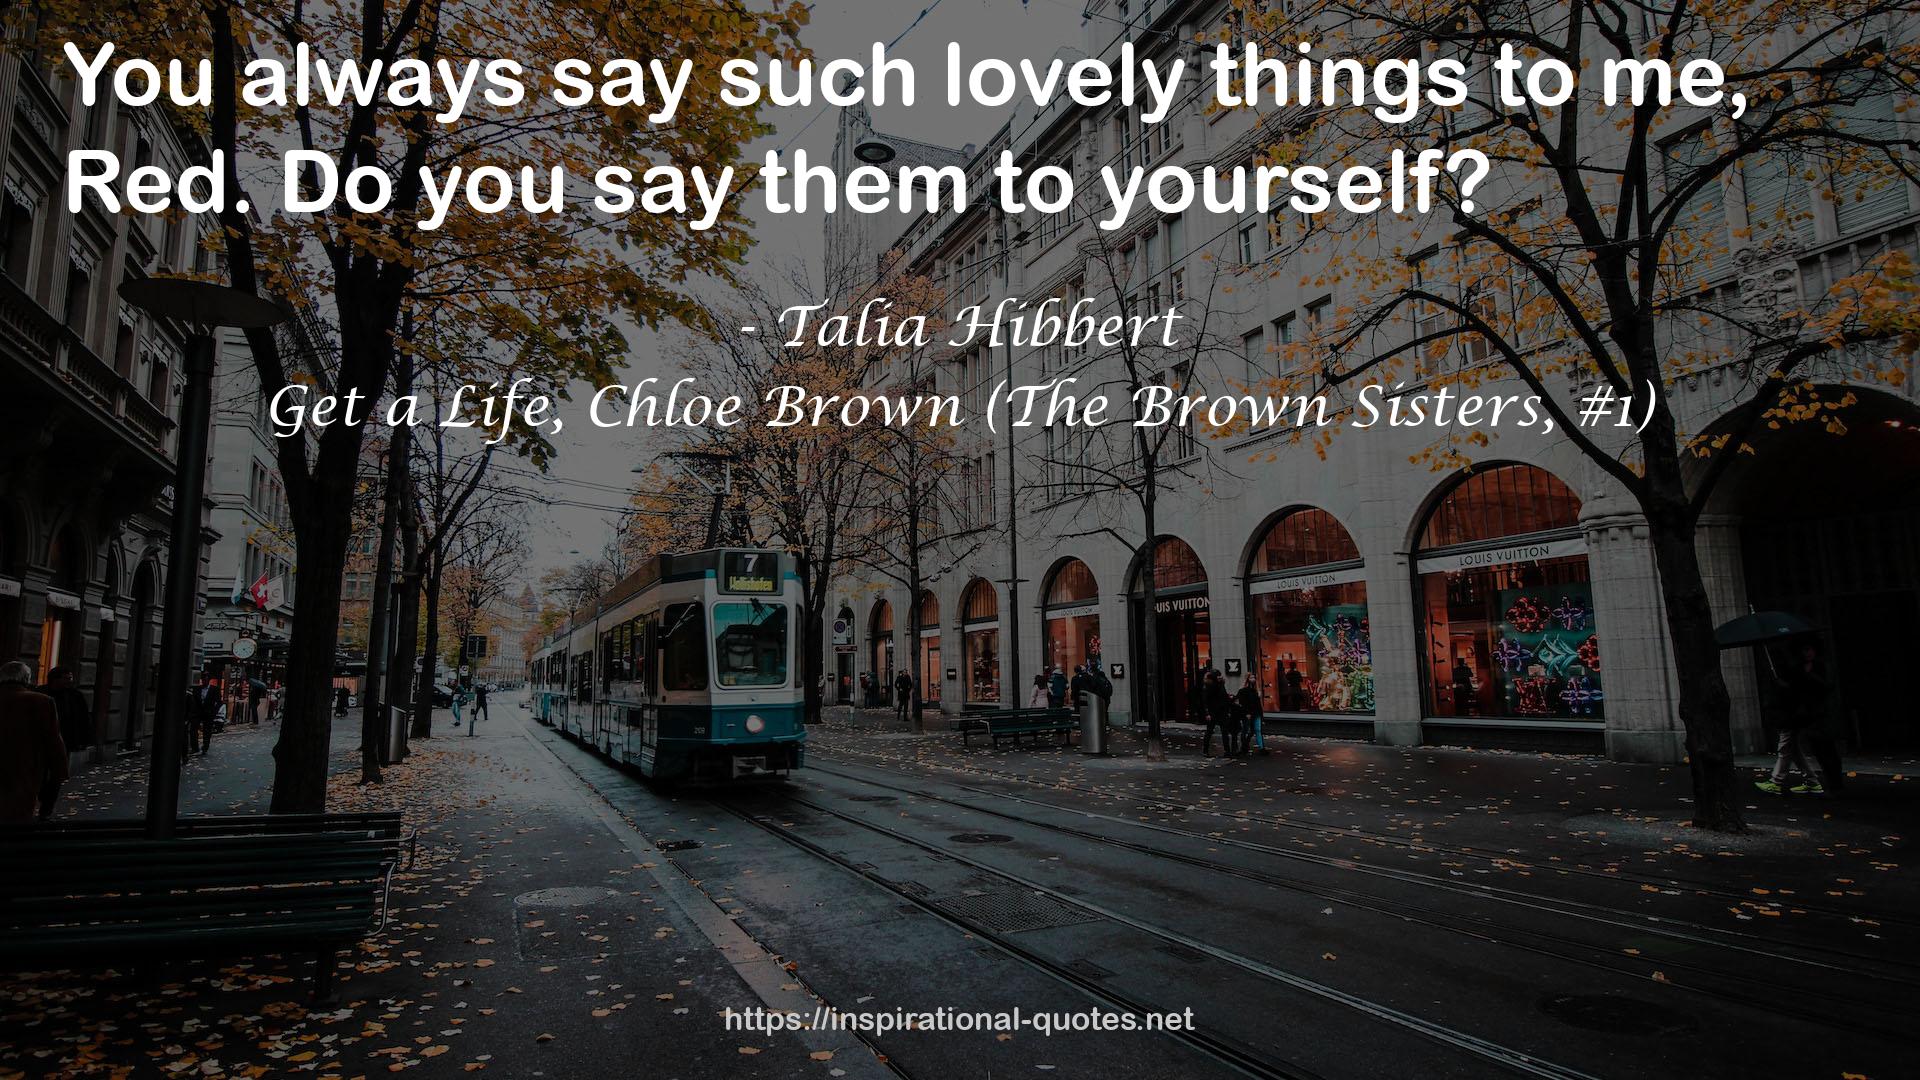 Get a Life, Chloe Brown (The Brown Sisters, #1) QUOTES